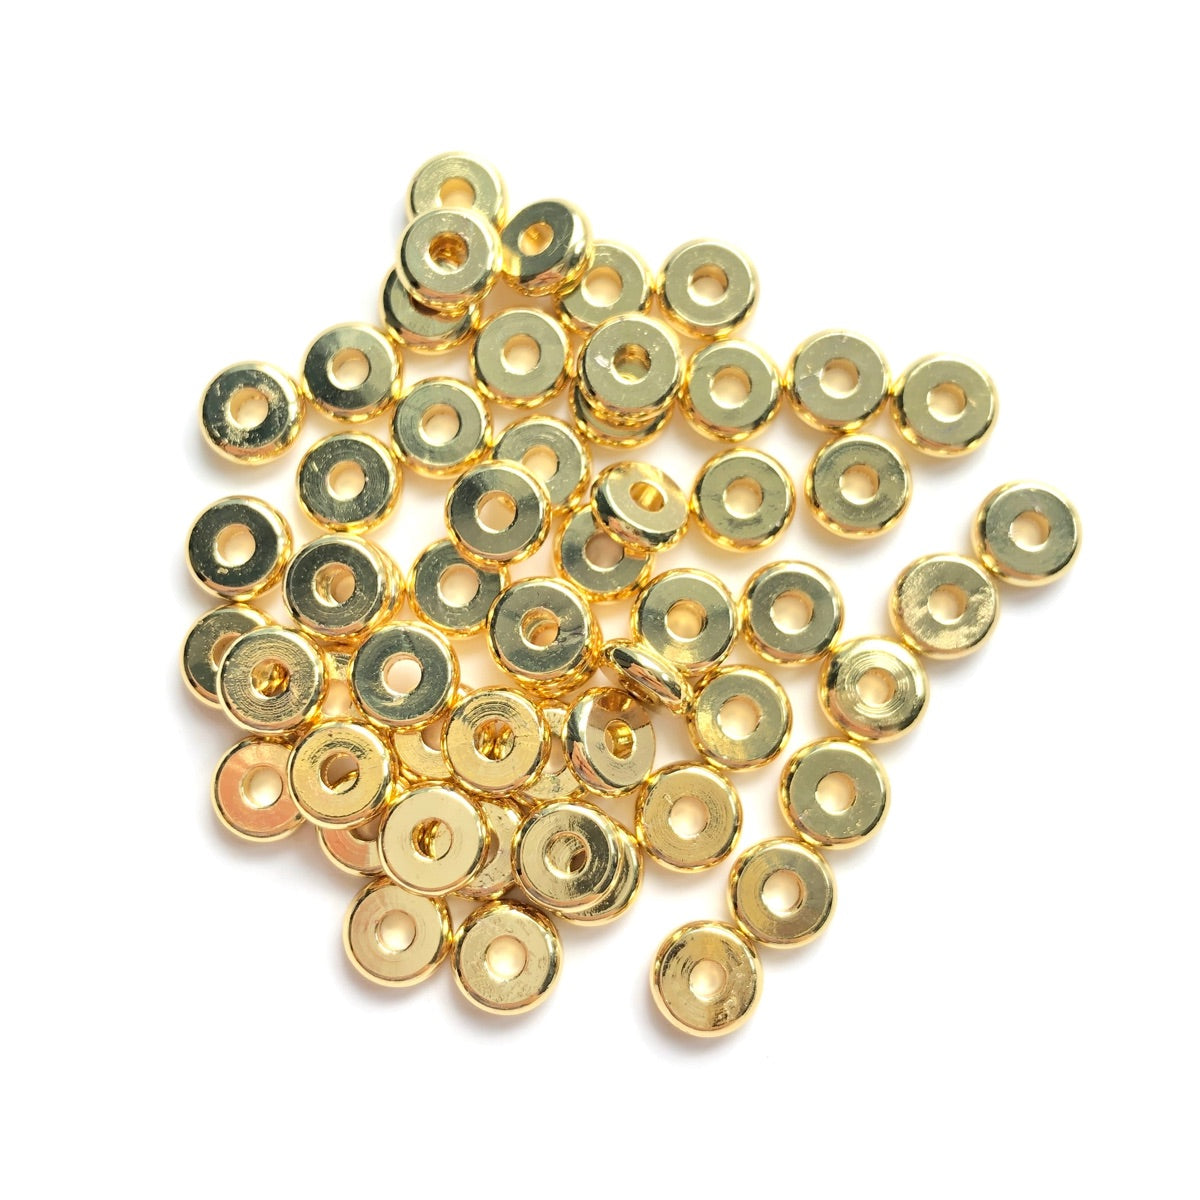 200pcs/lot 4/6/8/10mm Gold Plated Flat Round Spacers Accessories Charms Beads Beyond